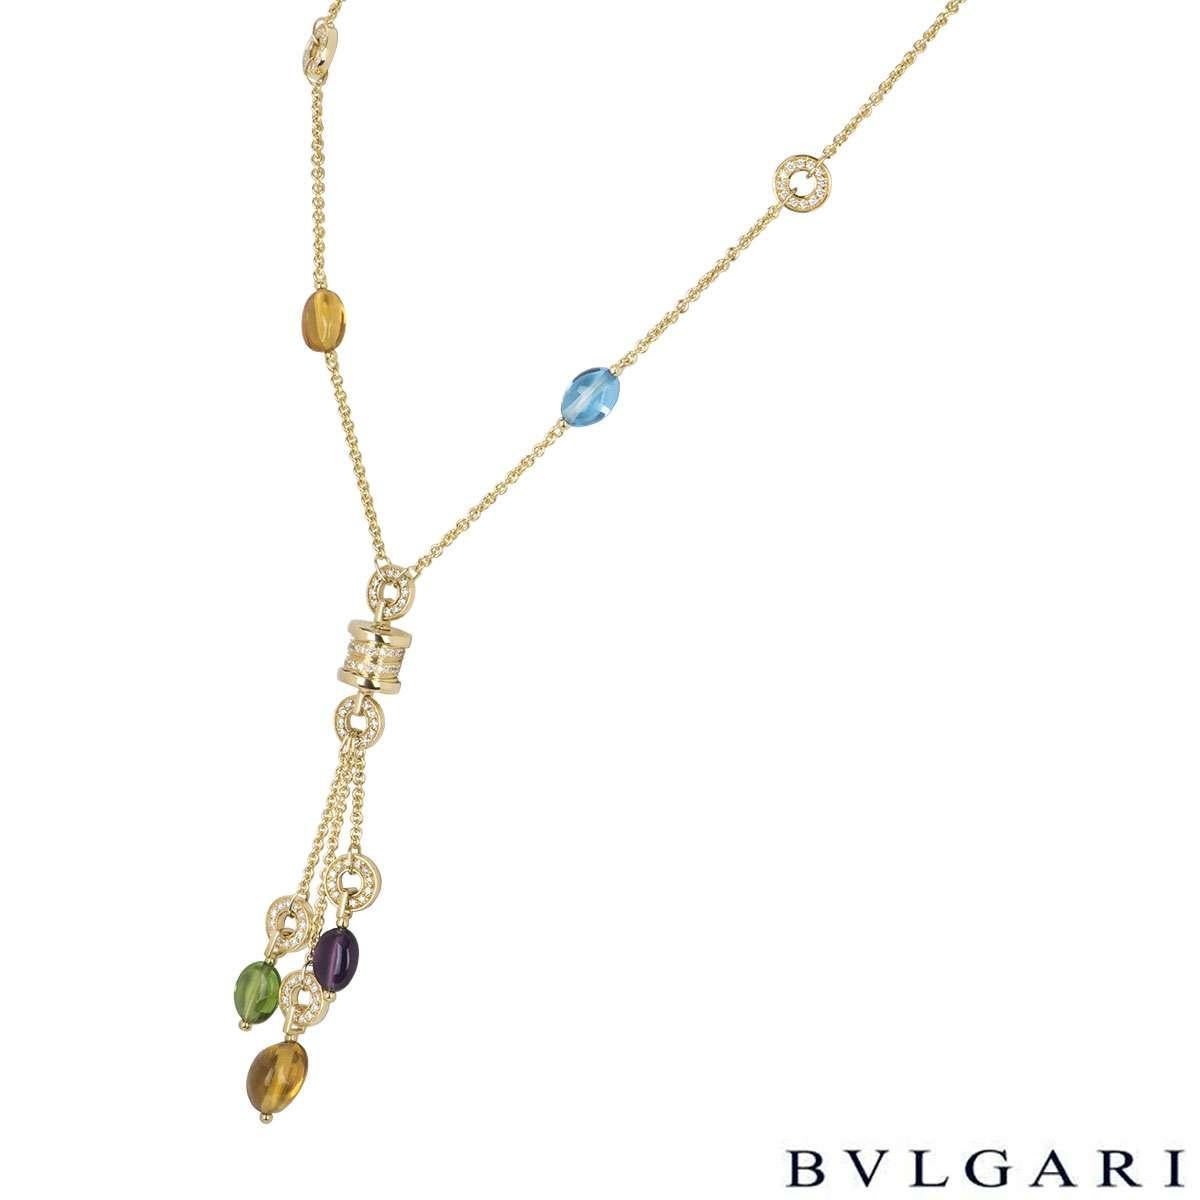 An 18k yellow gold multi-gem necklace by Bvlgari from the B.zero1 collection. The necklace comprises of a single citrine and blue topaz bead in the chain leading to the 'Bvglari Bvlgari' barrel which is partially set with round brilliant cut